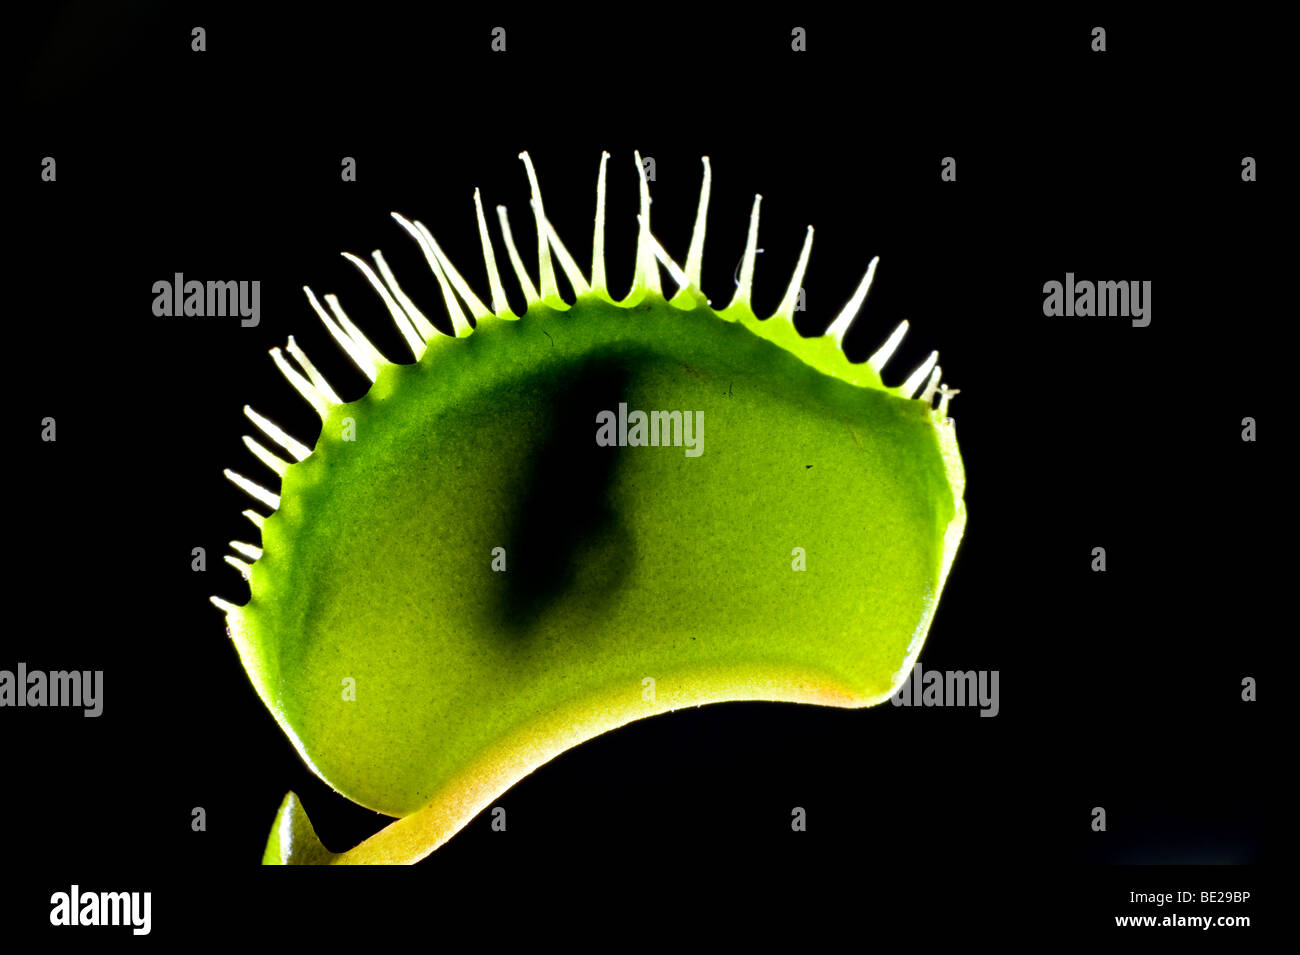 Venus Fly Trap Dionaea muscipula trap closed with insect inside Stock Photo